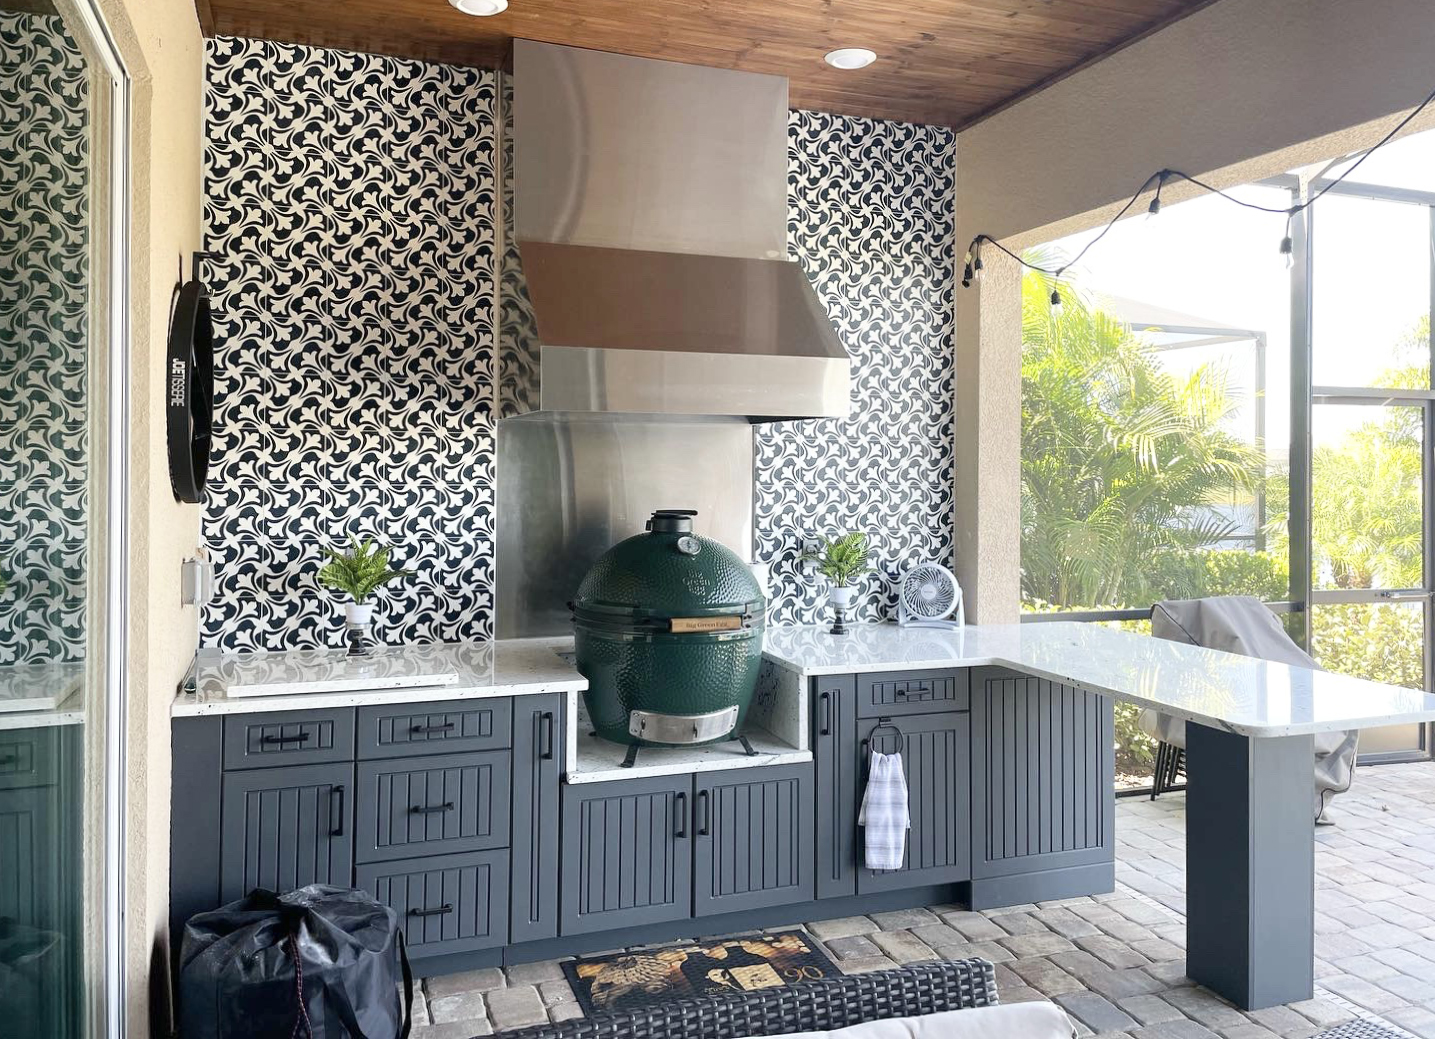 OUTDOOR KITCHEN 6. Custom outdoor kitchen in Lakewood Ranch, FL. Kitchen features charcoal grey, v-groove style cabinets. Appliances include Big Green Egg, Tradewind hood, stainless hood chase, stainless backsplash and black bar pulls.